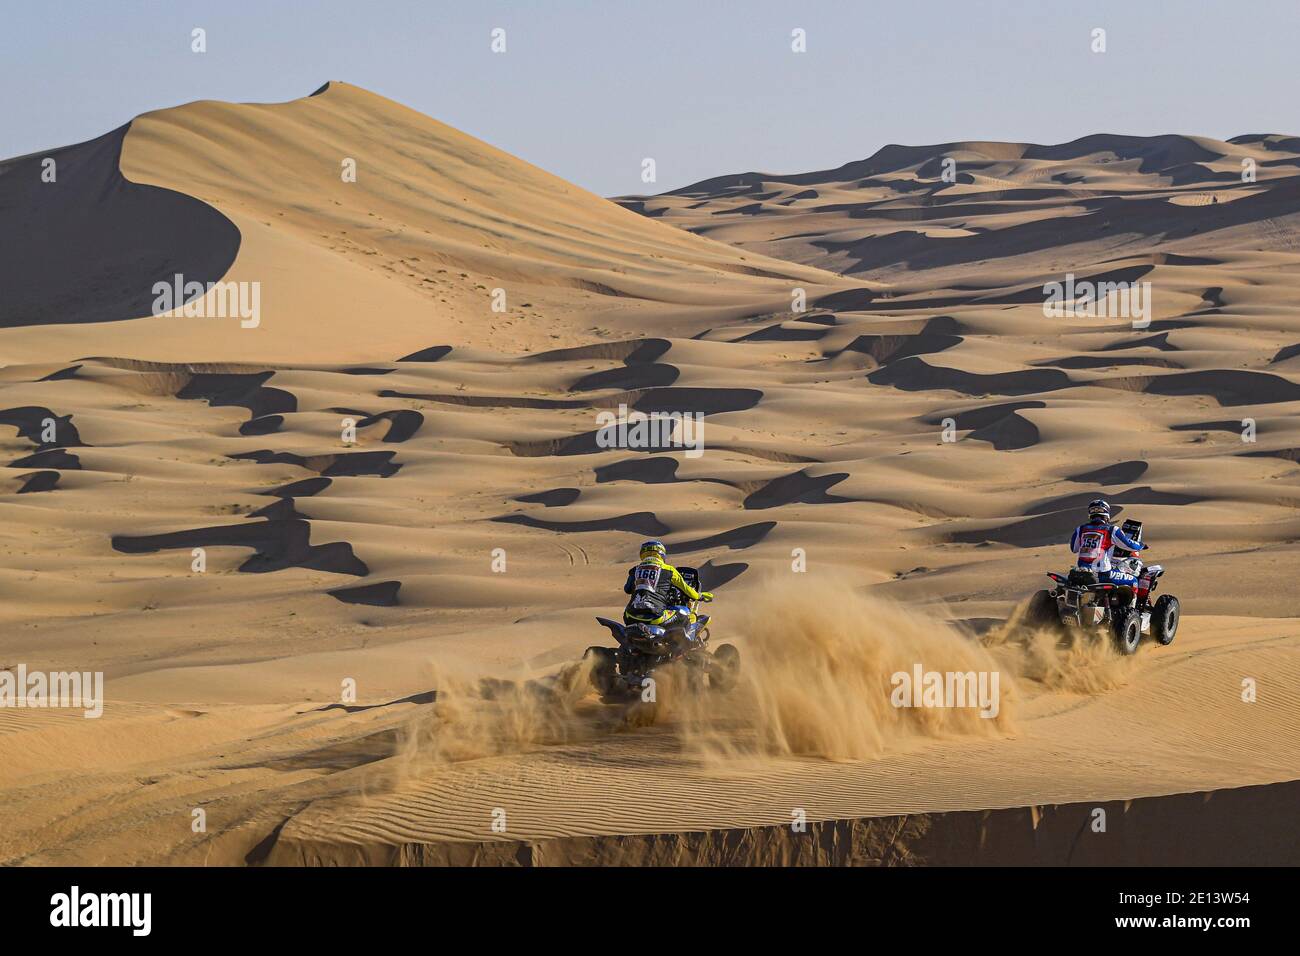 #168 Pedemonte Italo (chl), Yamaha, Enrico Racing Team, Quad, action during the 2nd stage of the Dakar 2021 between Bisha and W / LM Stock Photo